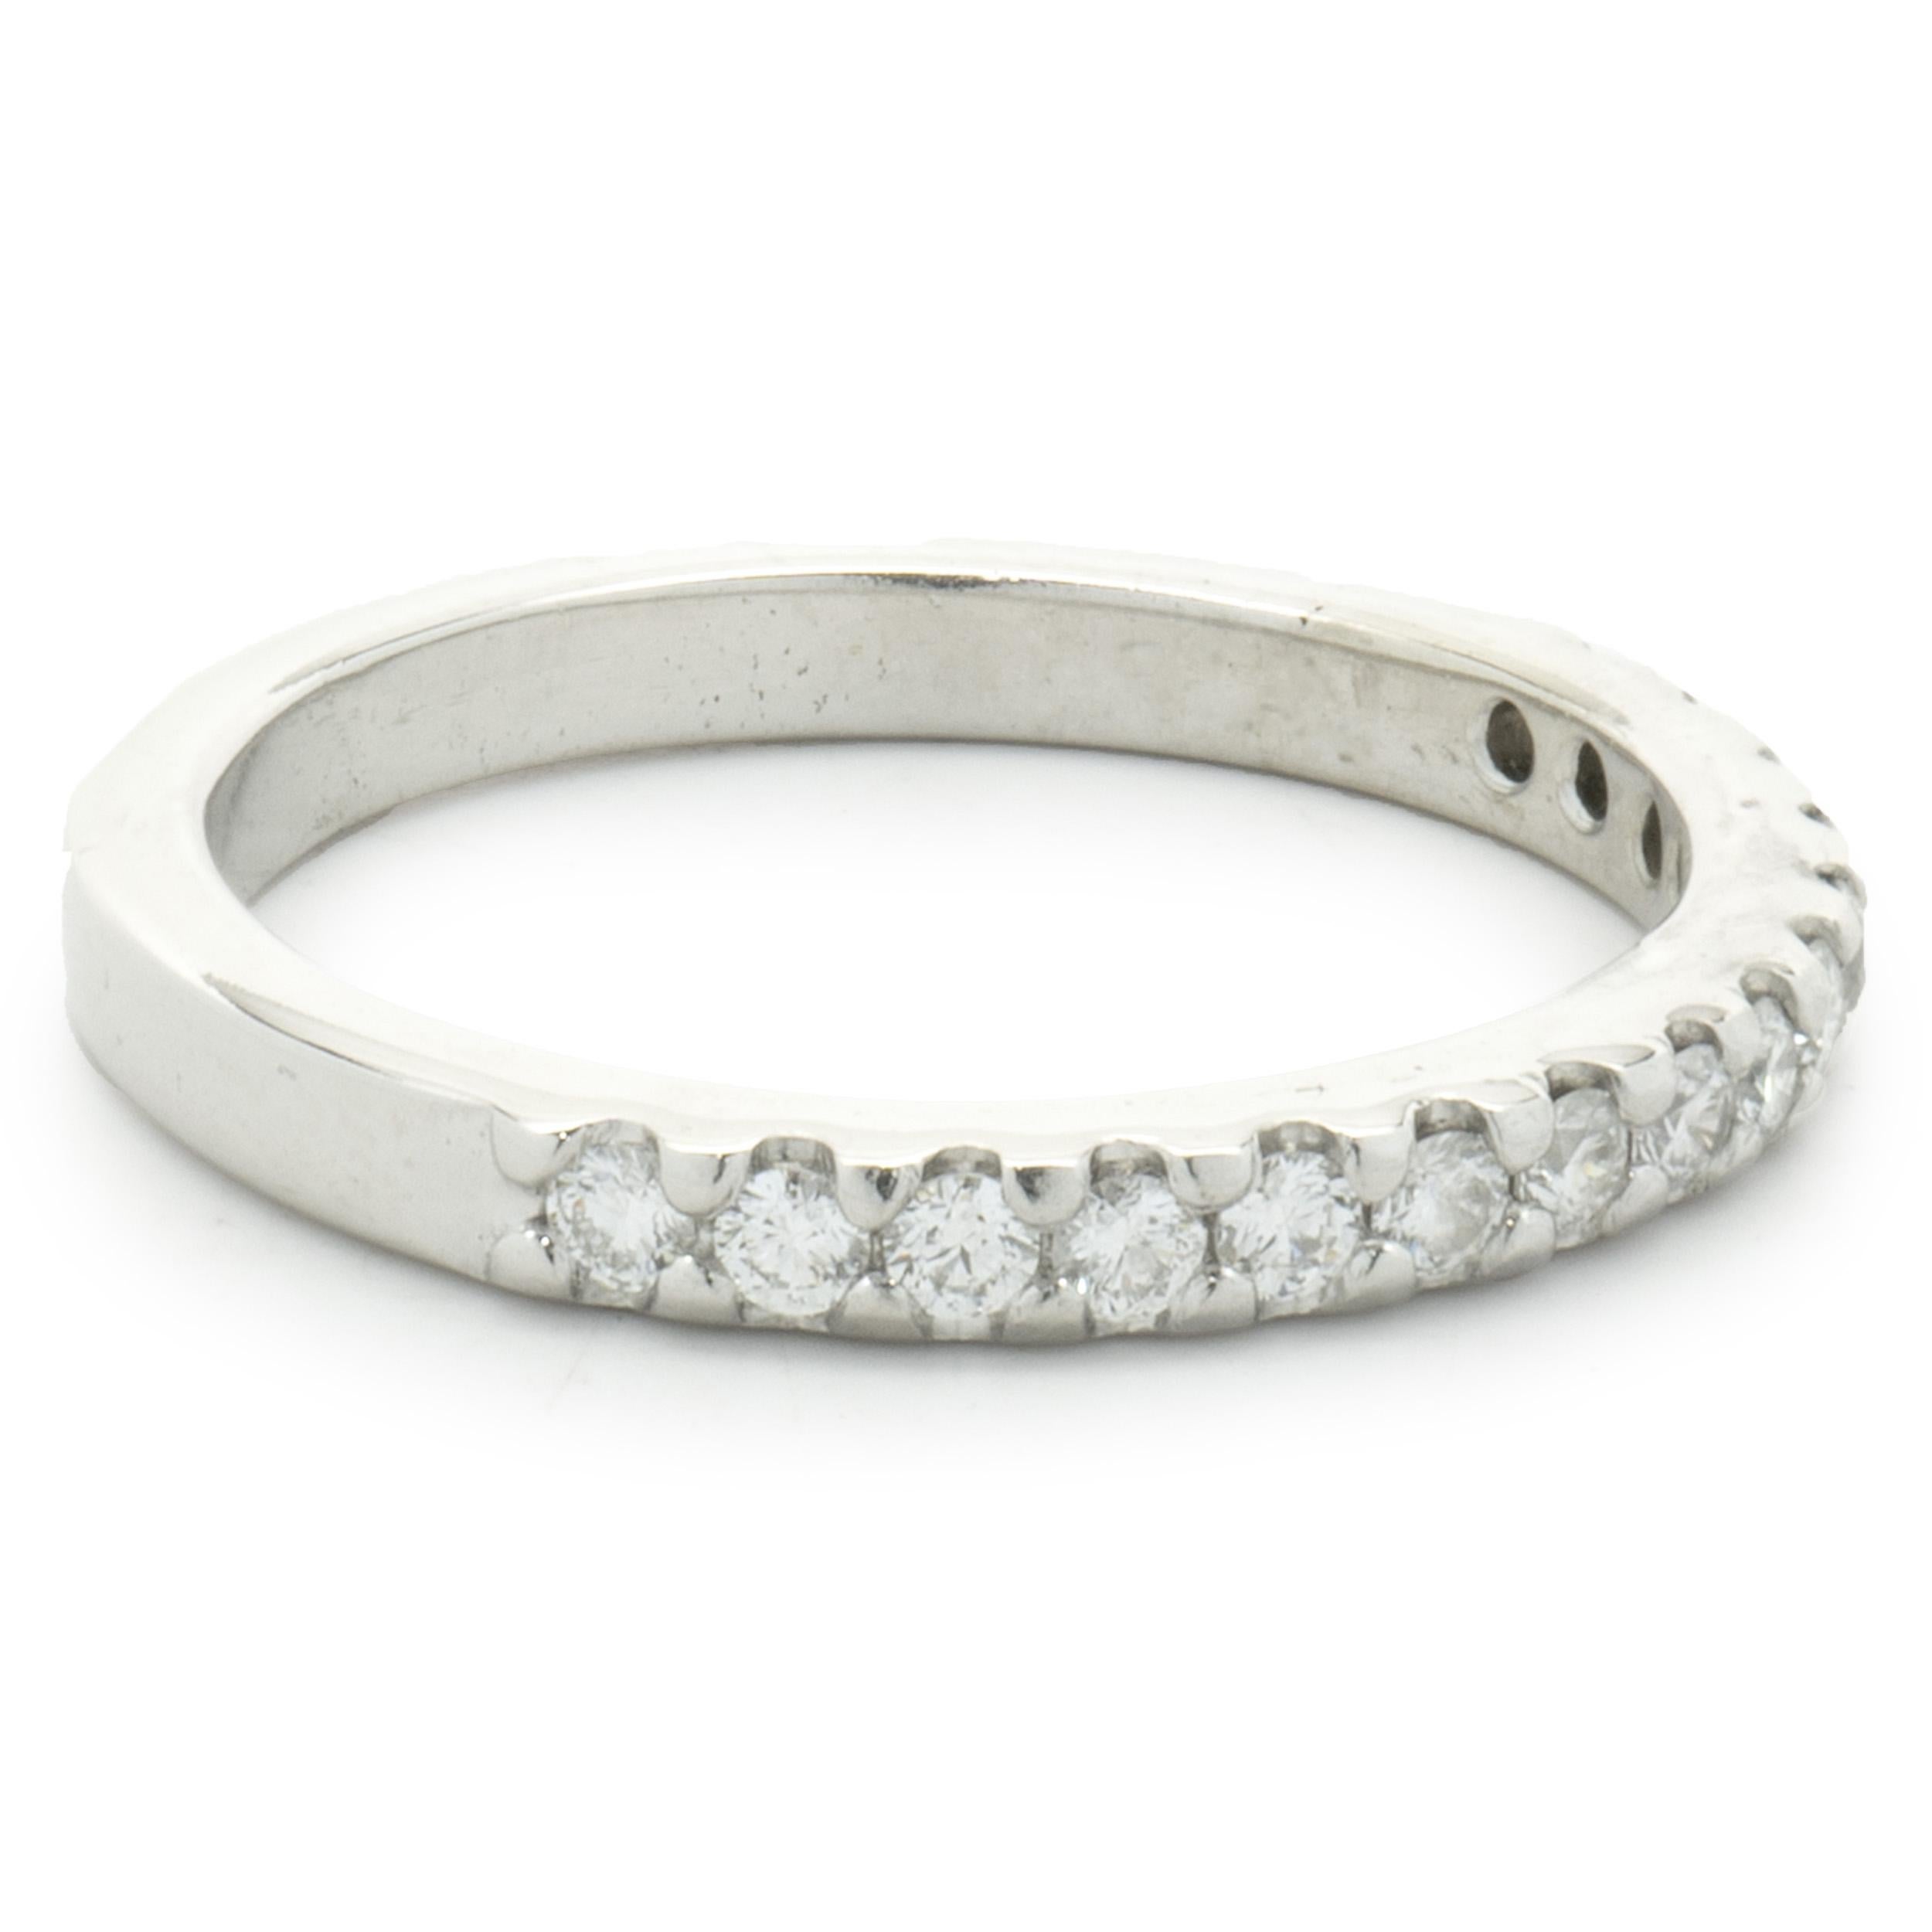 14 Karat White Gold Diamond Band In Excellent Condition For Sale In Scottsdale, AZ